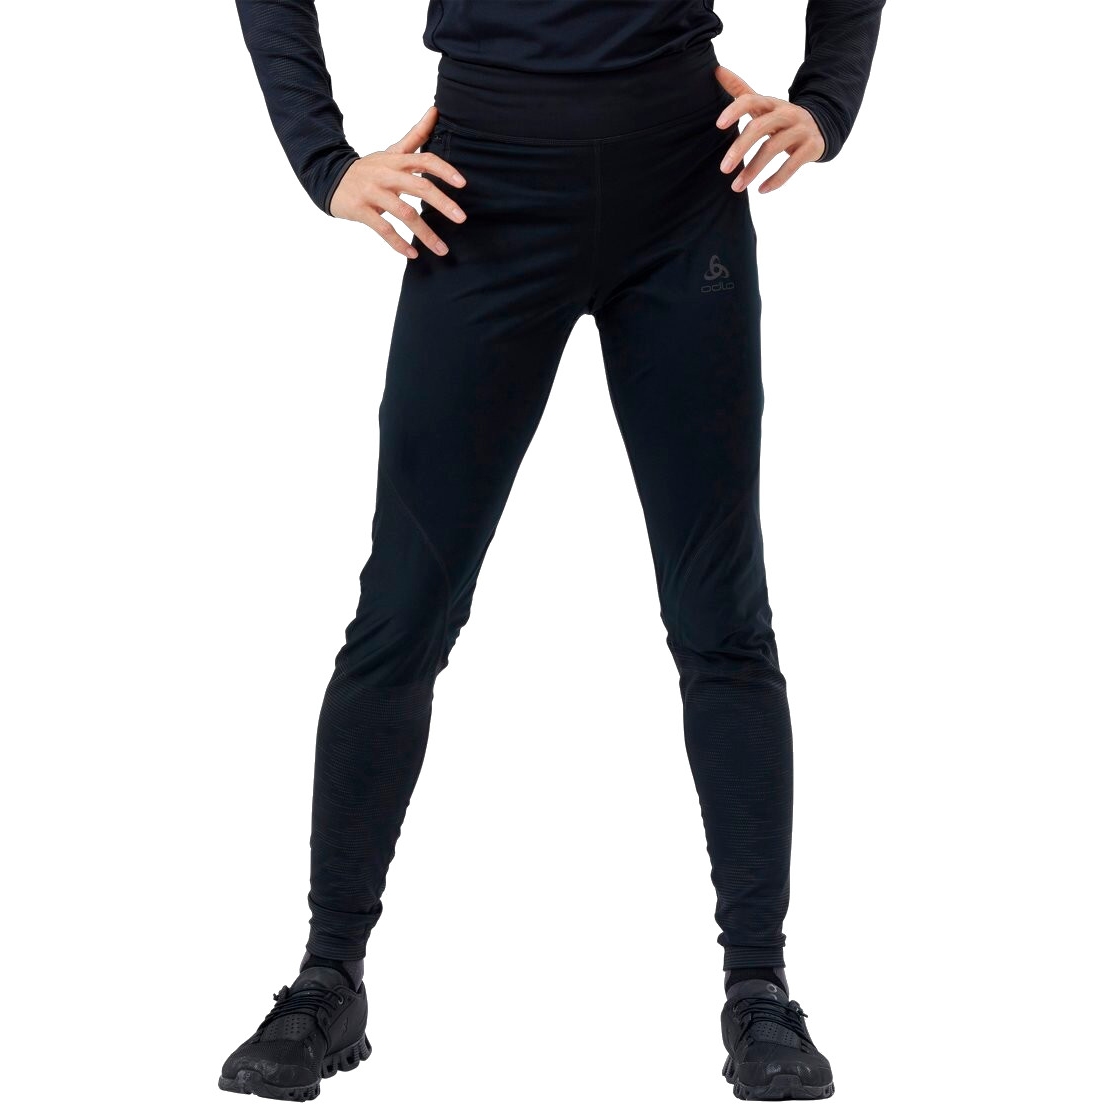 Picture of Odlo Women&#039;s Zeroweight Warm Reflective Running Tights 323121 - black